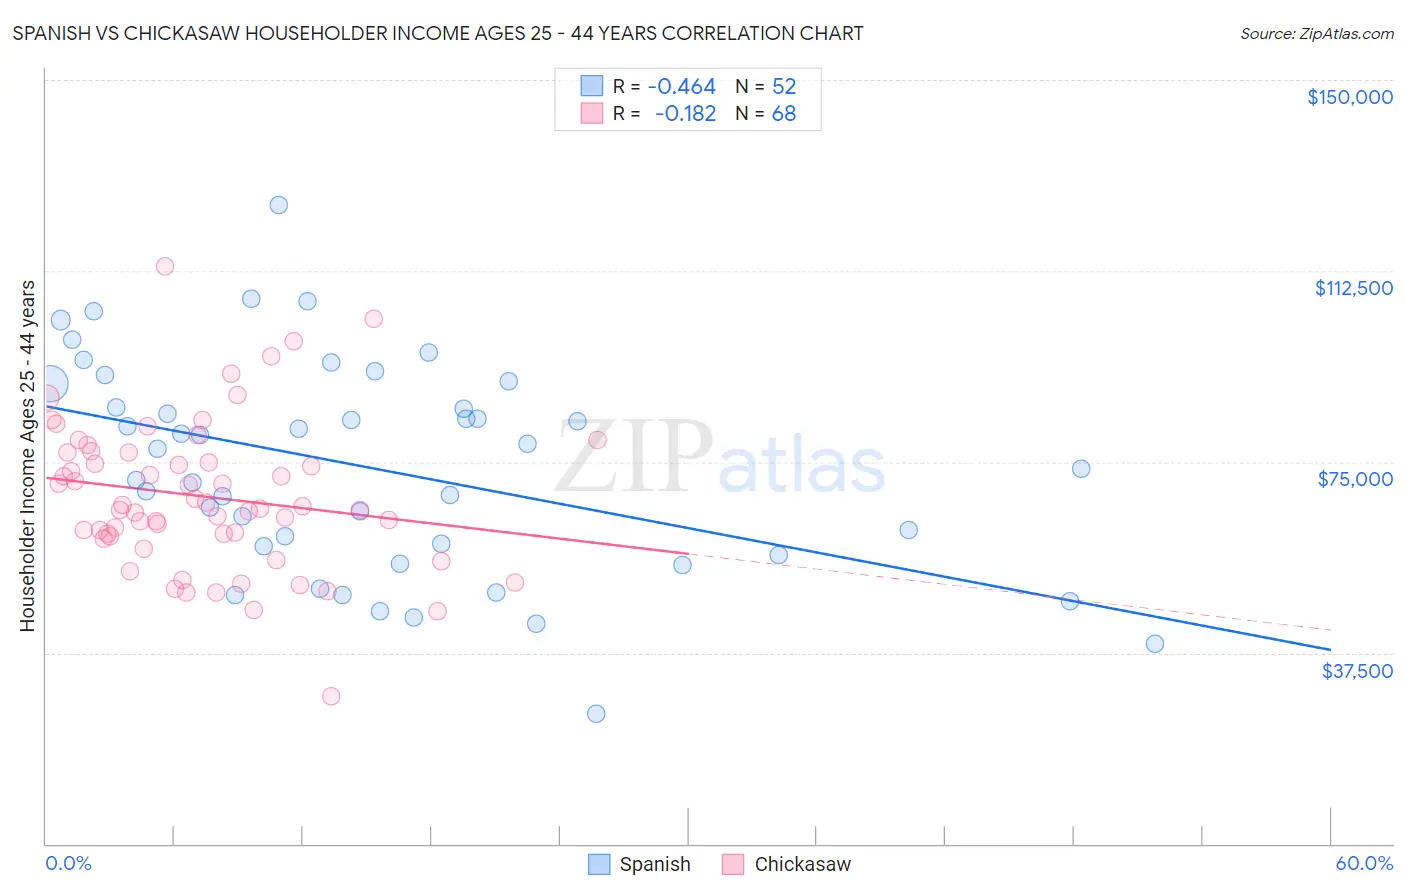 Spanish vs Chickasaw Householder Income Ages 25 - 44 years